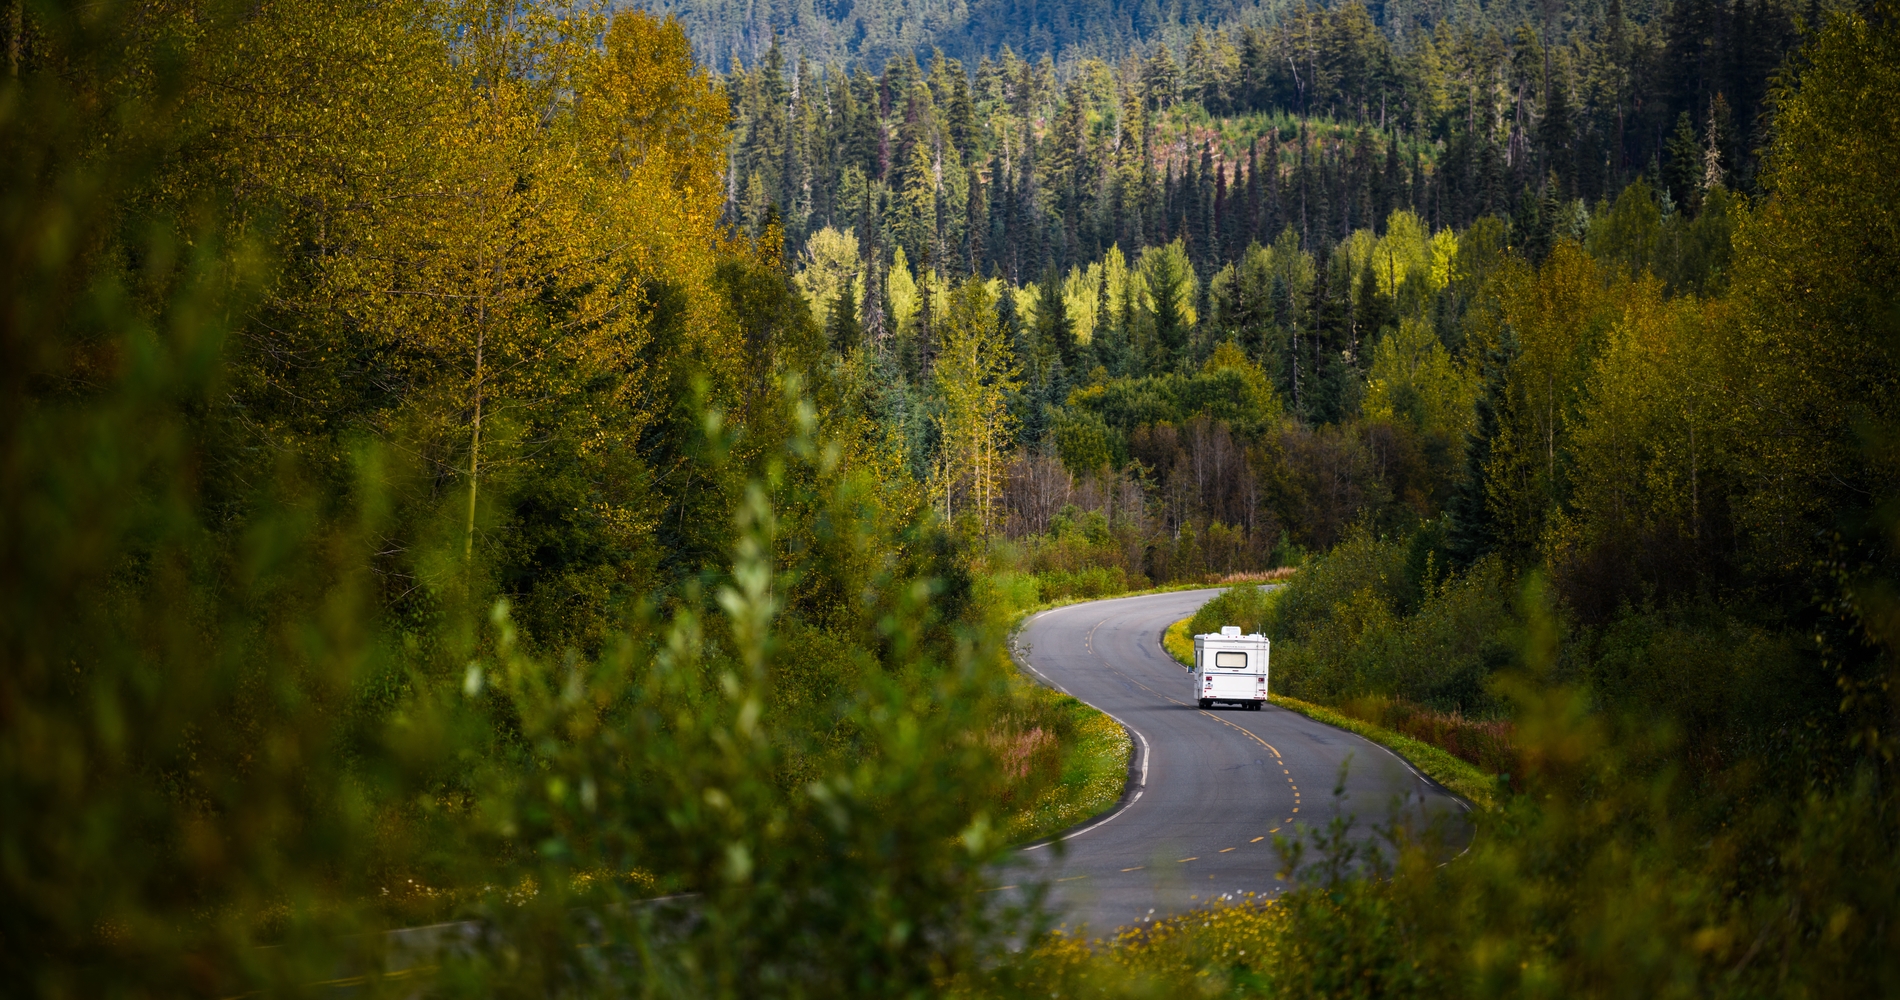 An RV drives down a winding highway surrounded by great wilderness.